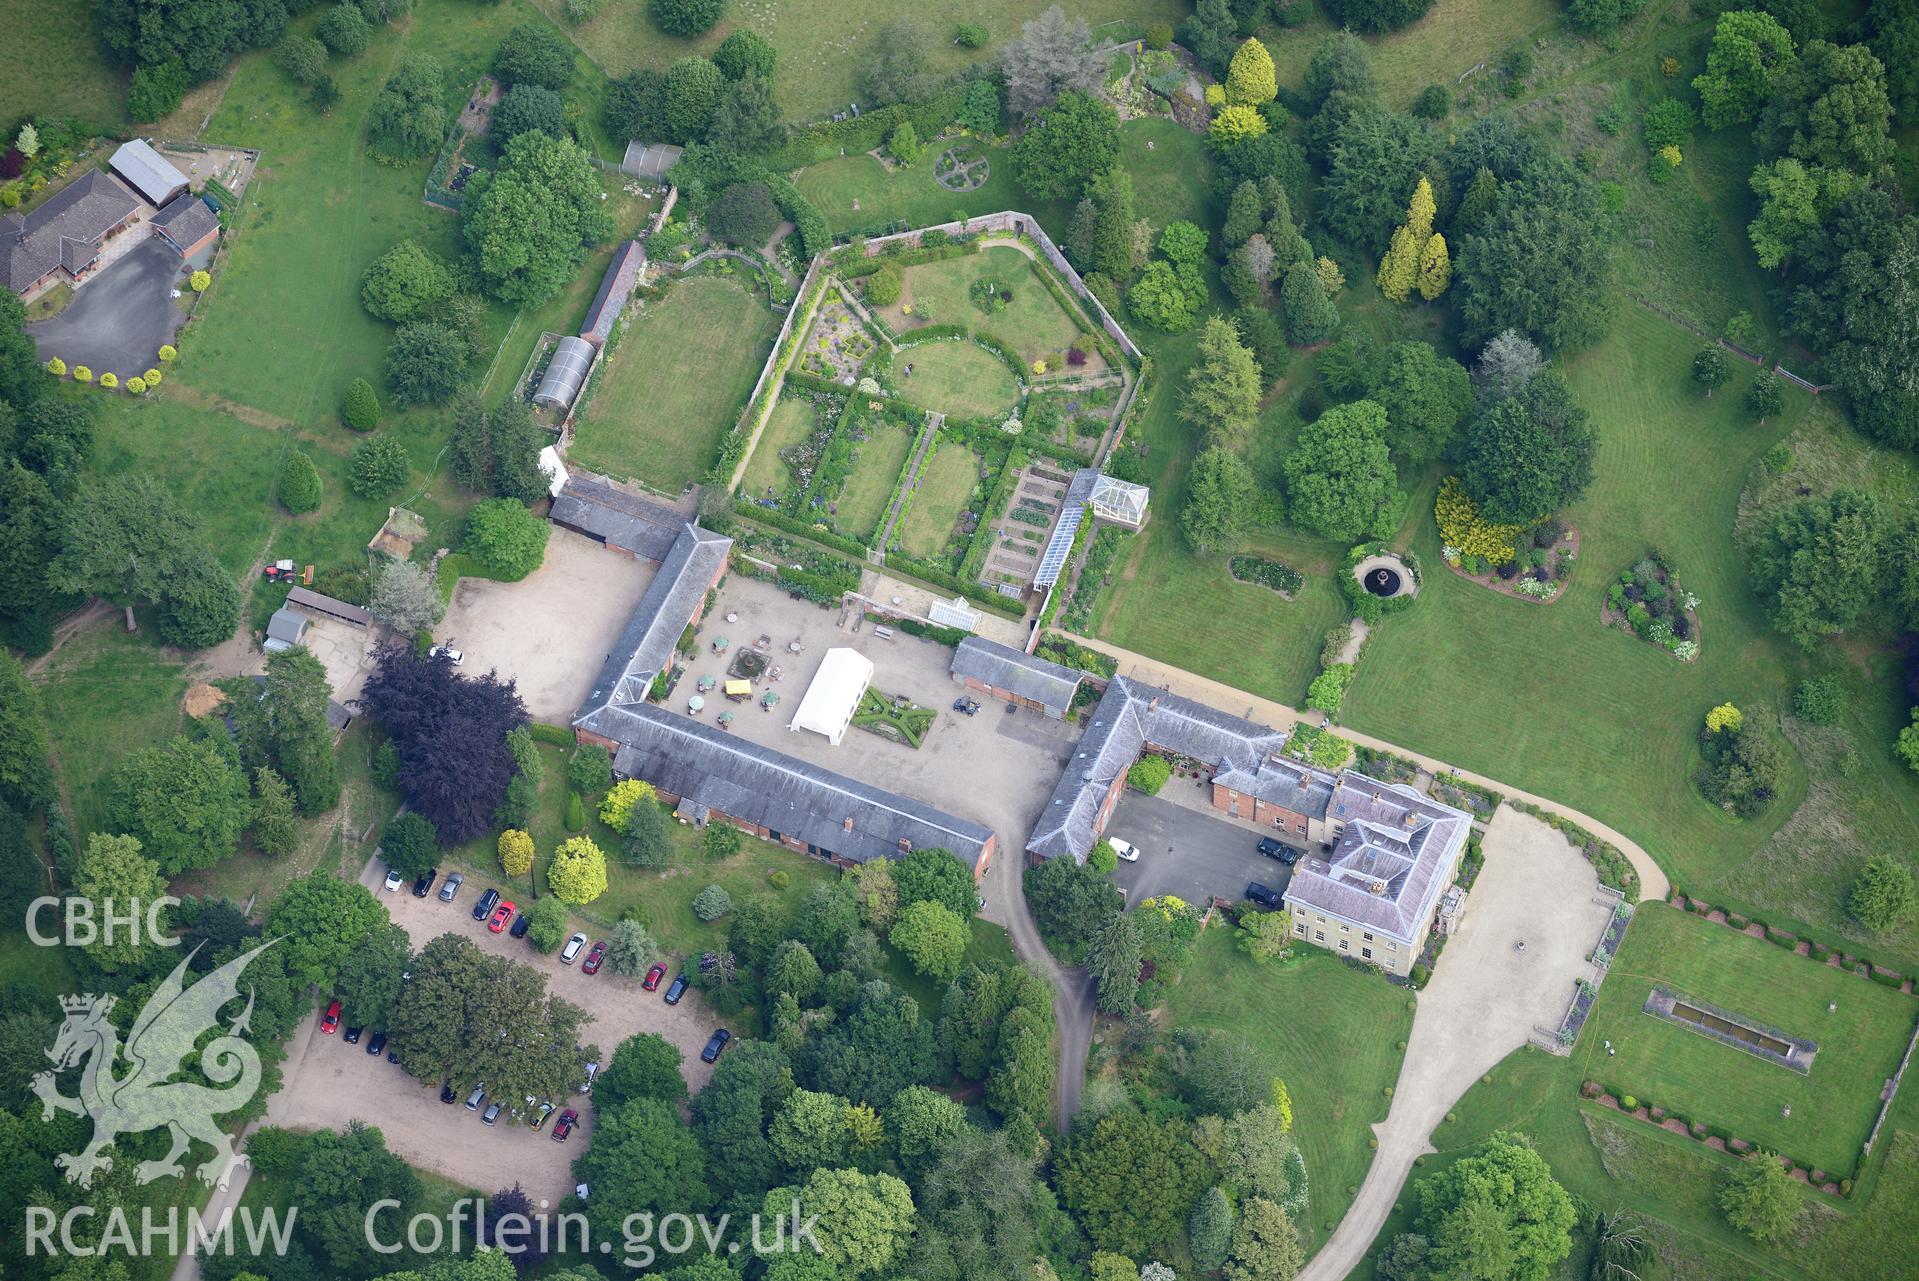 Glansevern hall with its stables and gardens, south east of Berriew, Montgomery. Oblique aerial photograph taken during the Royal Commission's programme of archaeological aerial reconnaissance by Toby Driver on 30th June 2015.